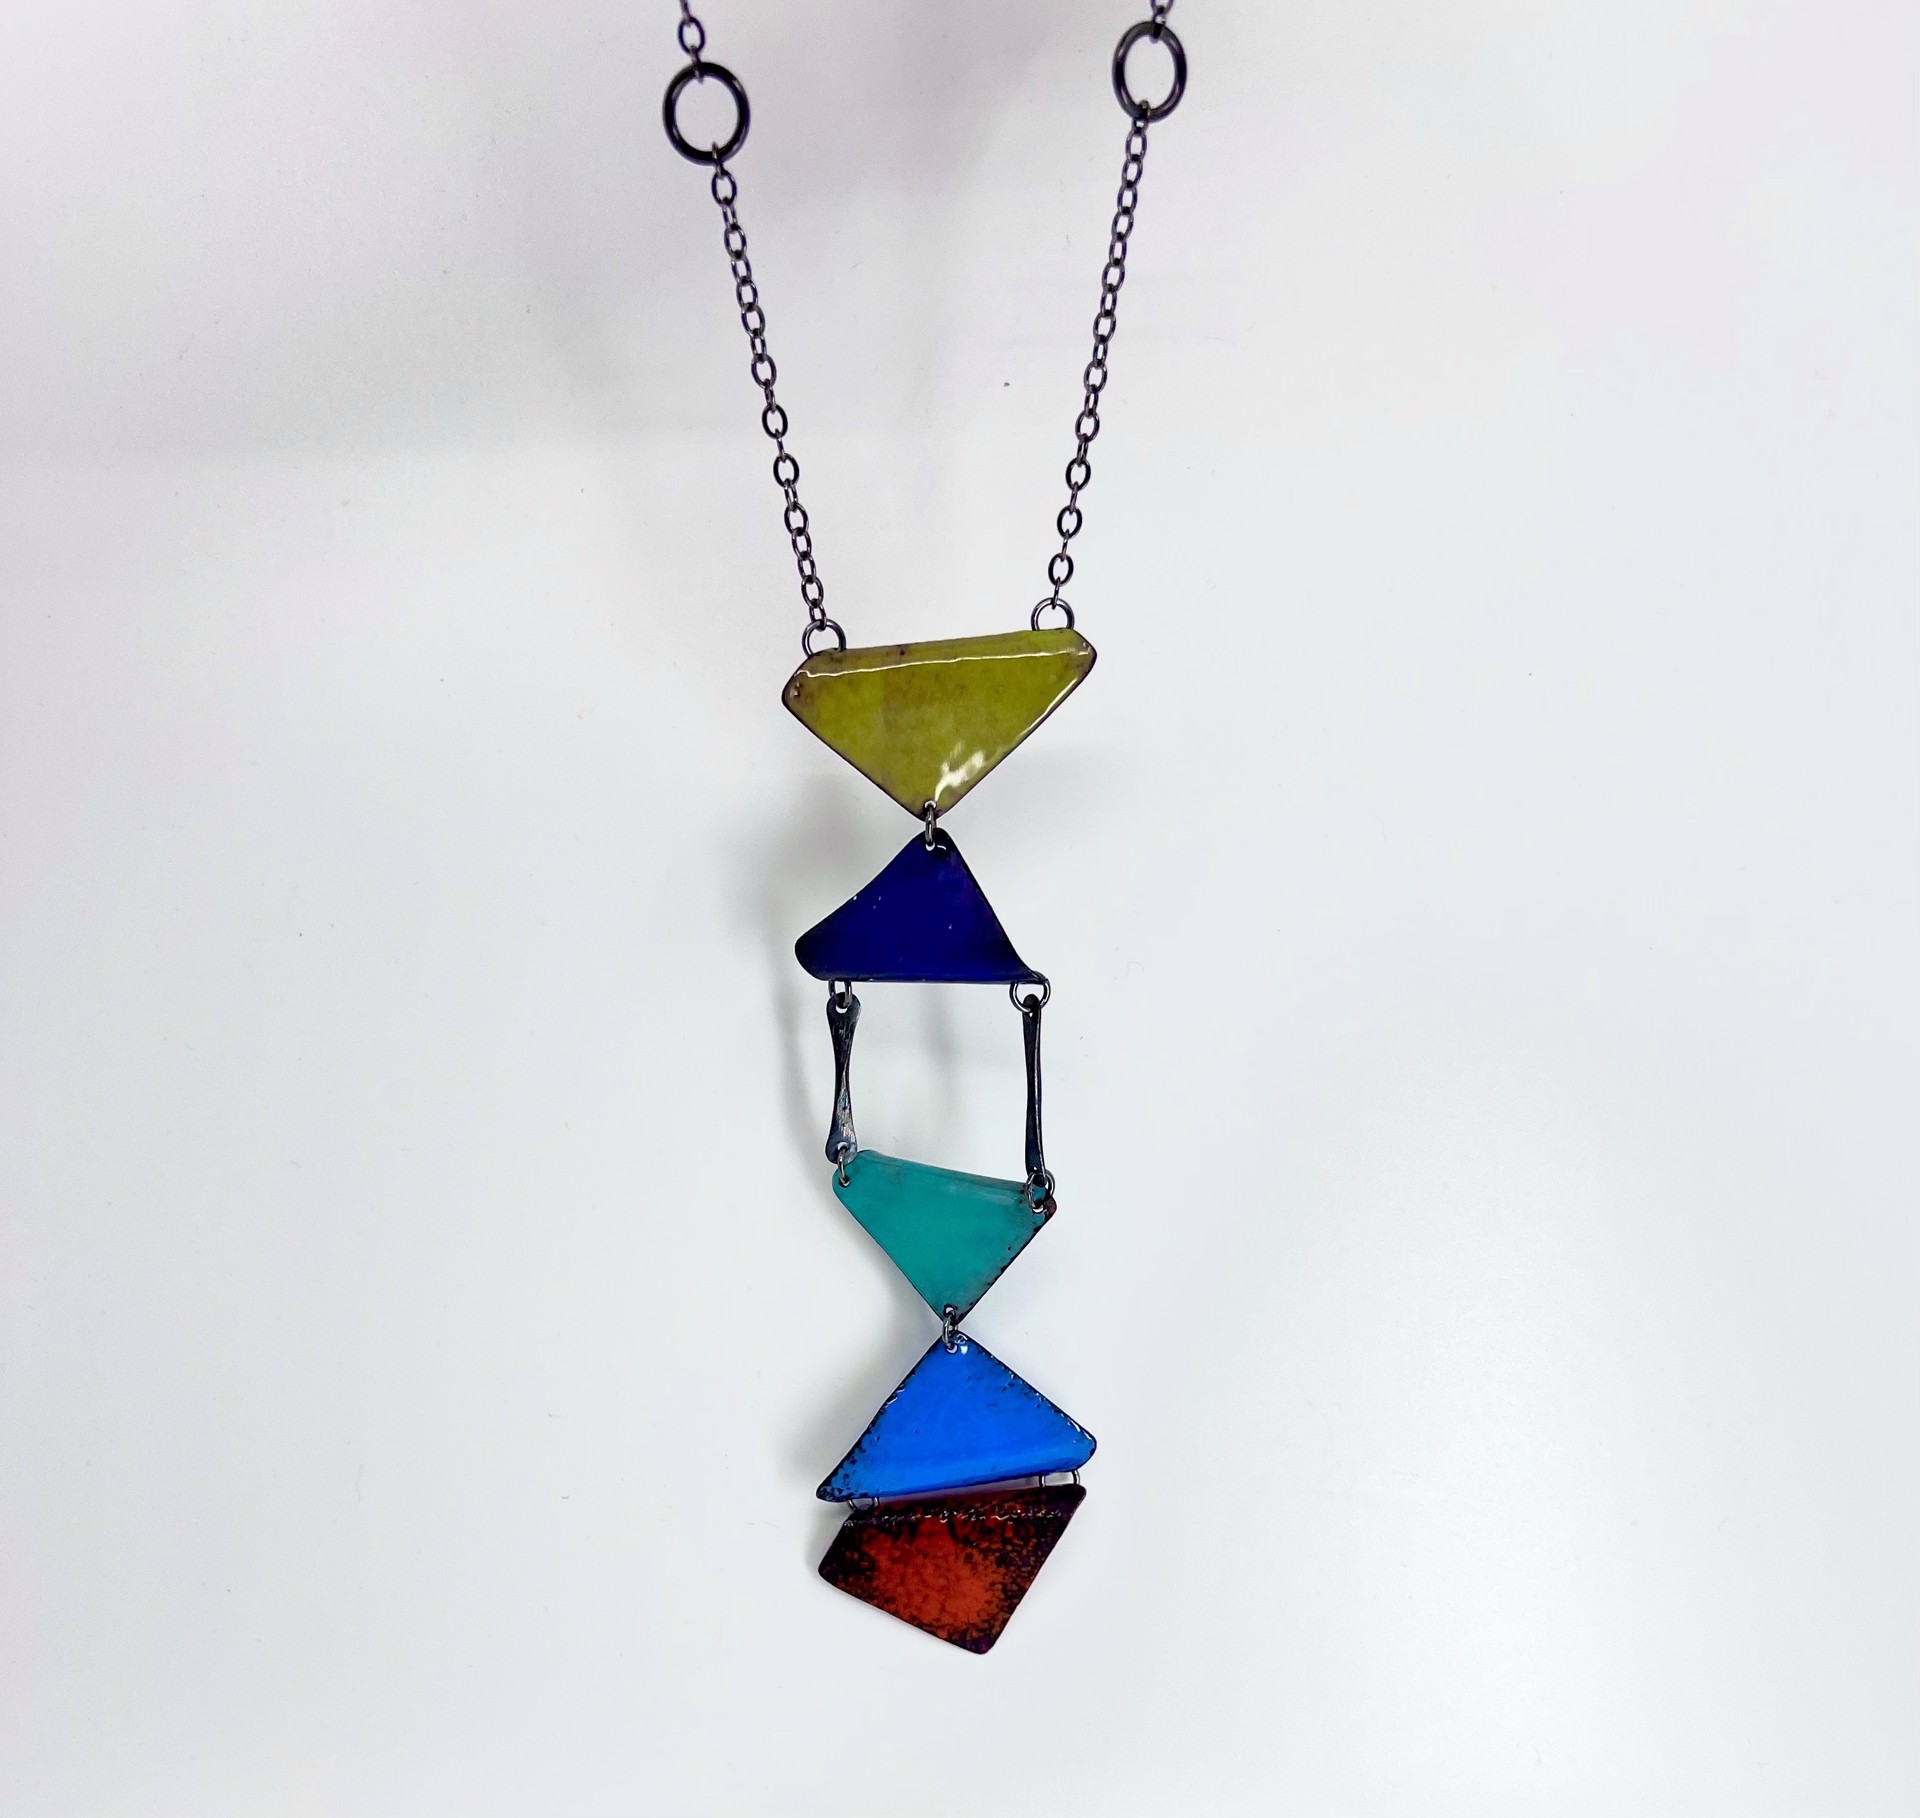 8329 Gravity Necklace, 5 Folded Over (50% Off Listed Price) by Mackenzie King